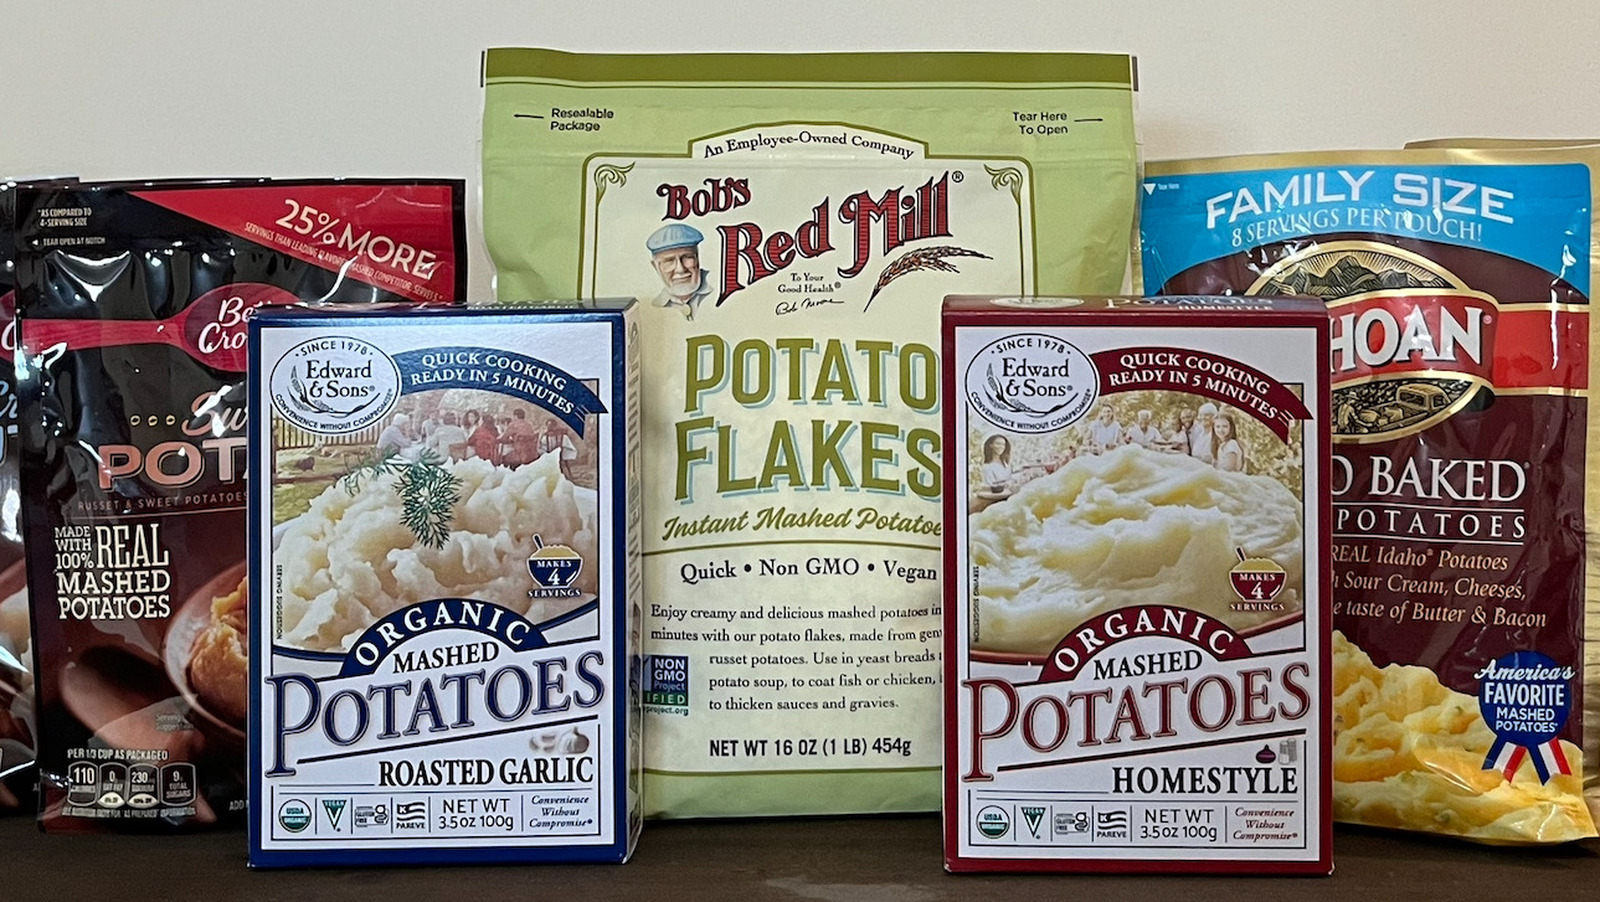 Instant Mashed Potatoes, Recipes from The Mill